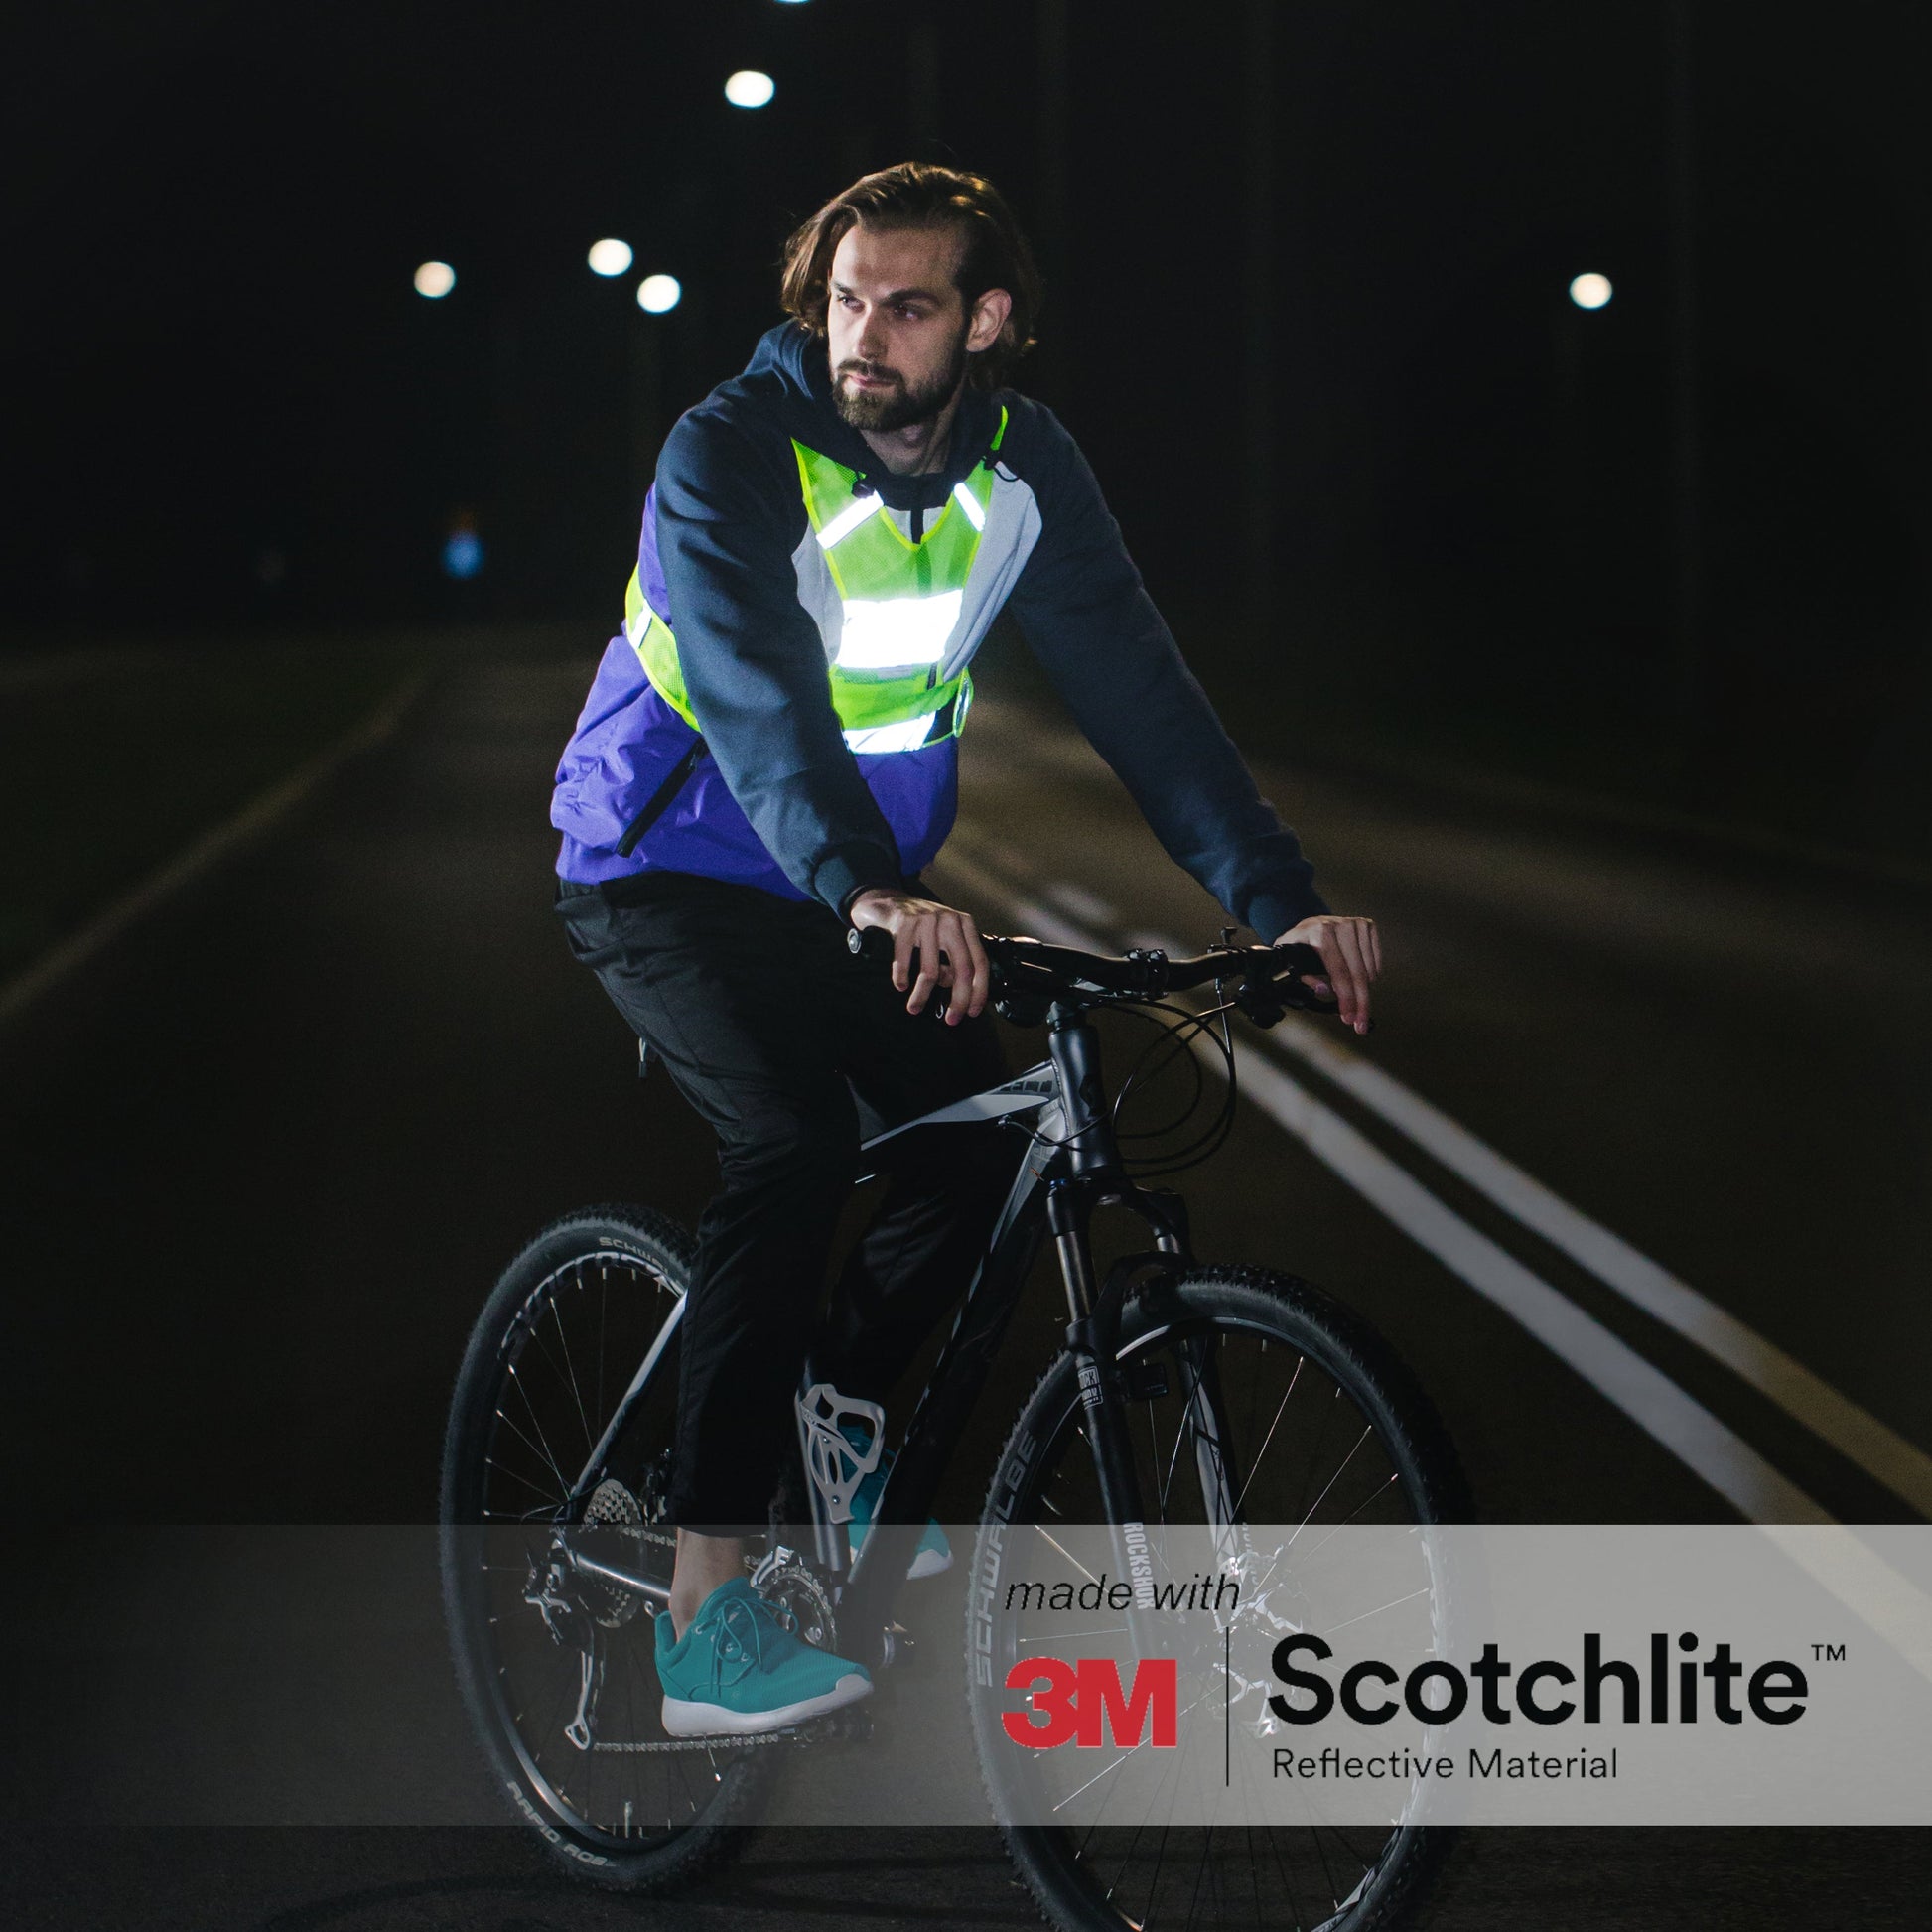 Person outside at night on bike wearing running vest